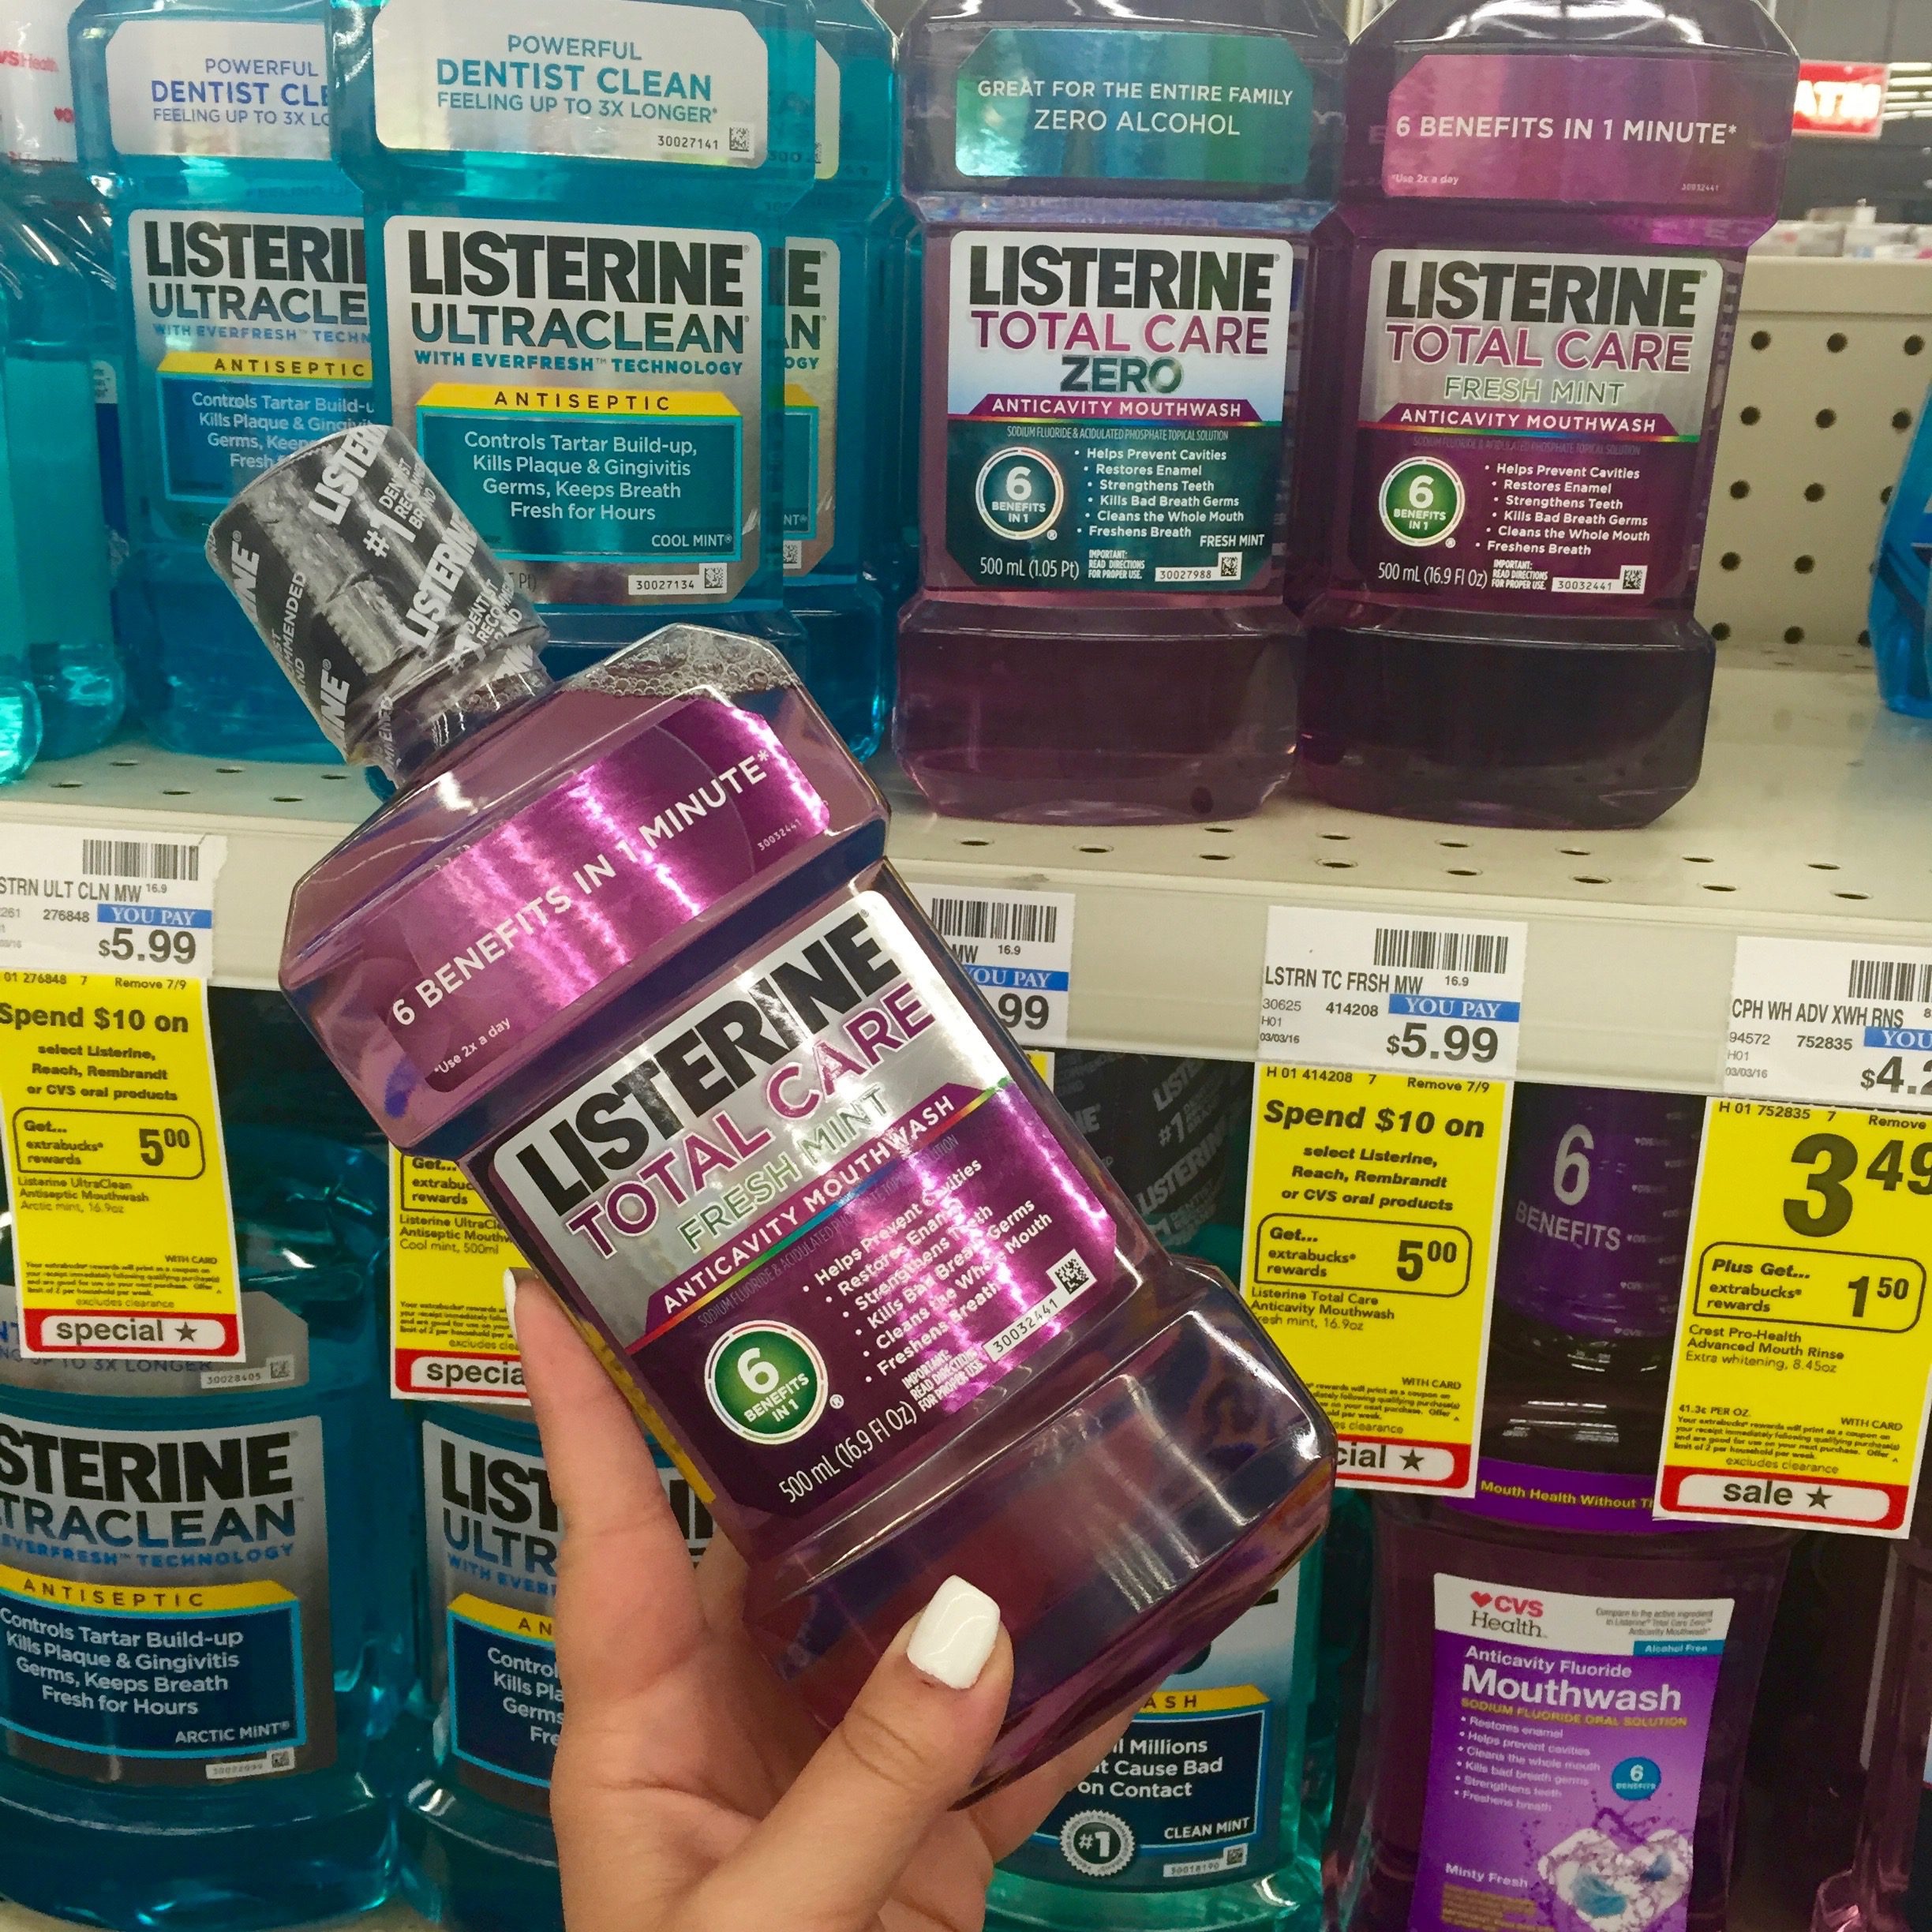 missyonmadison, bold moments, listerine, listerine total care, oral hygiene, listerine oral hygiene, beauty blogger, tooth brush, white teeth, how to get pearly whites, how to get white teeth, la blogger, fresh flowers, floss, flosser, floss, health and beauty, cvs, cvs extra care,